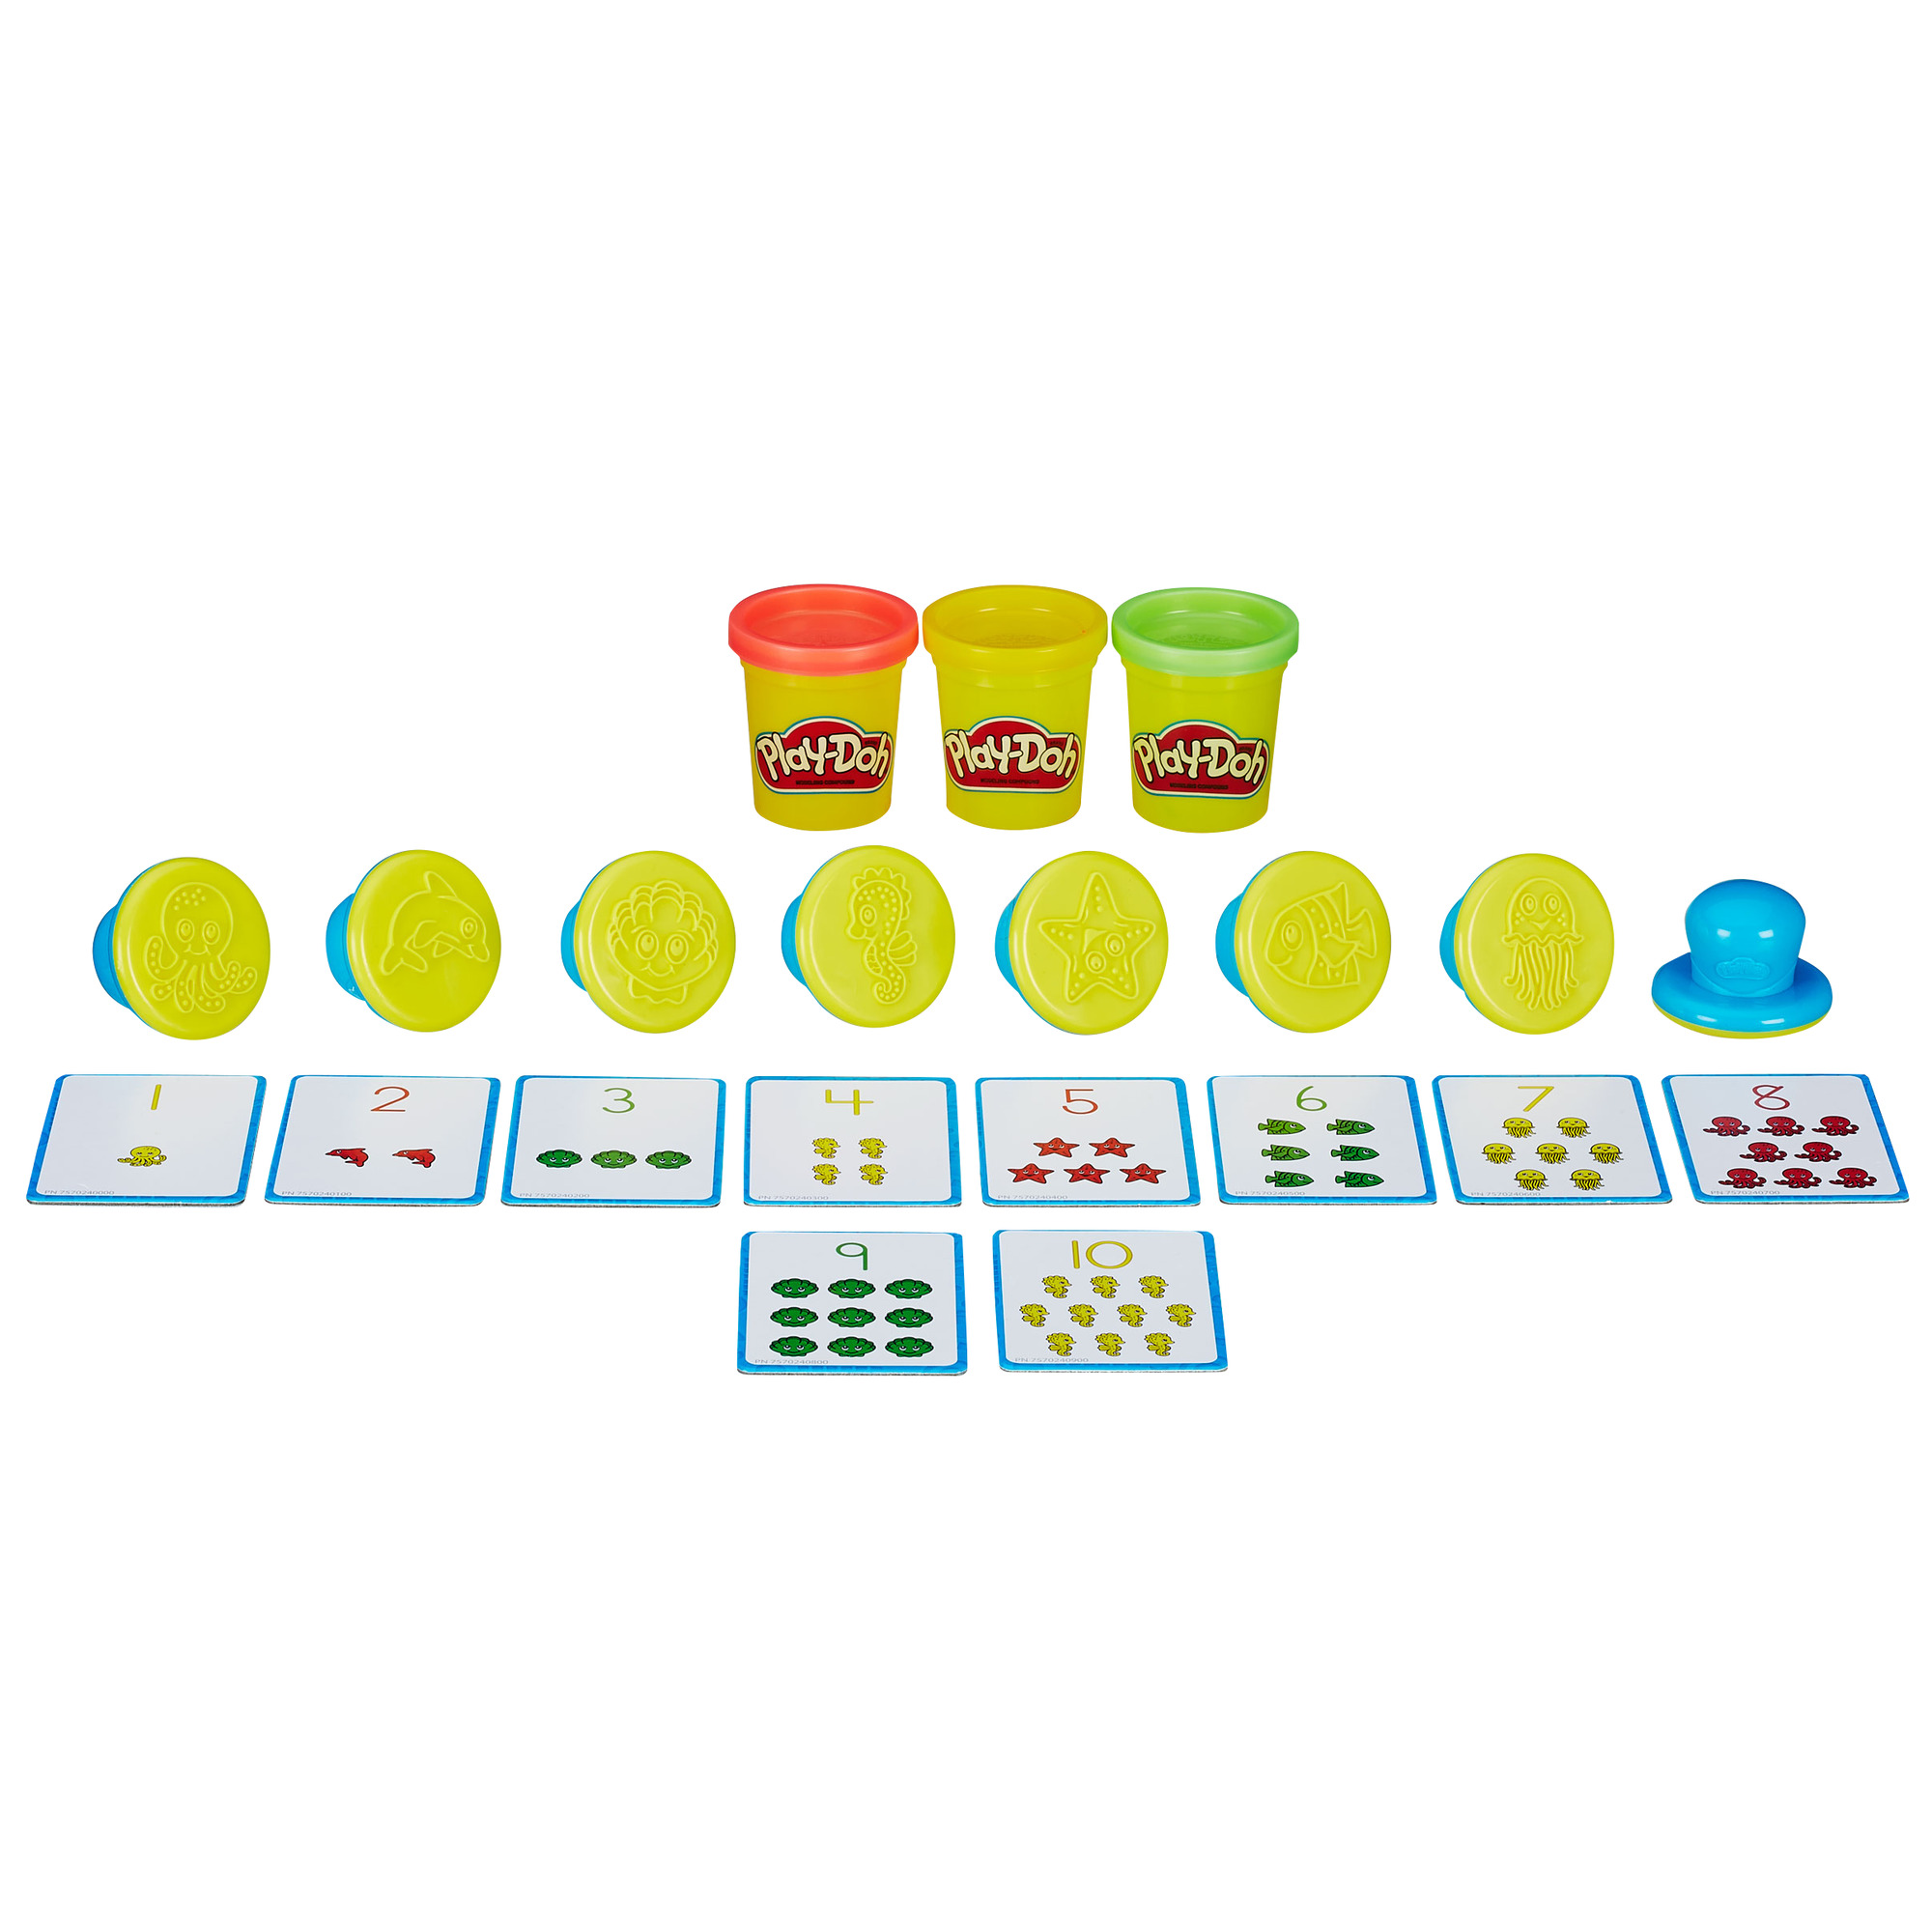 Play-Doh Shape & Learn Numbers & Counting Set with 3 Cans - image 2 of 4